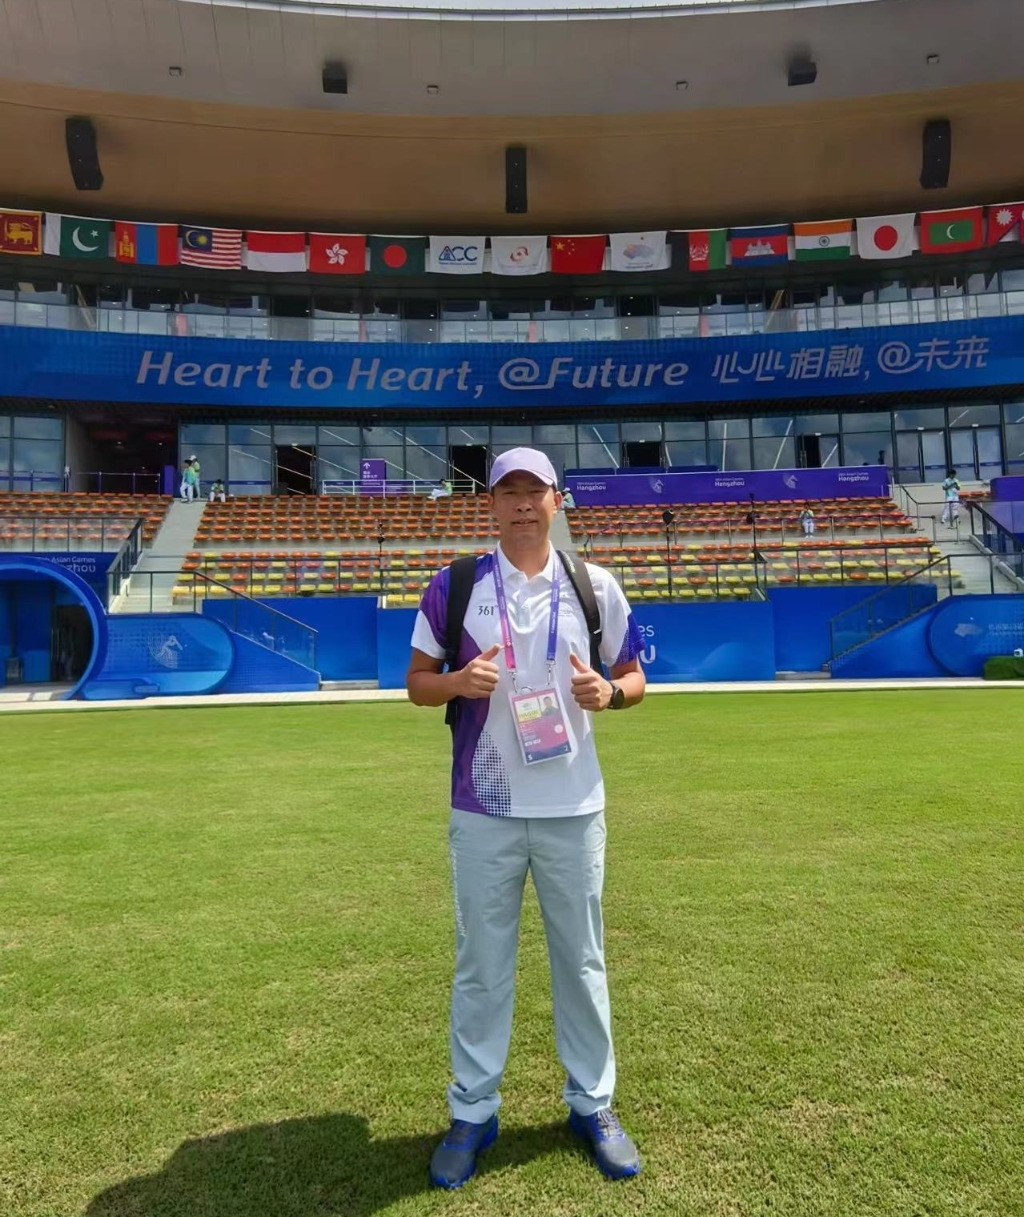 Zhang Peng, the cricket referee. (Photo provided by the interviewee)